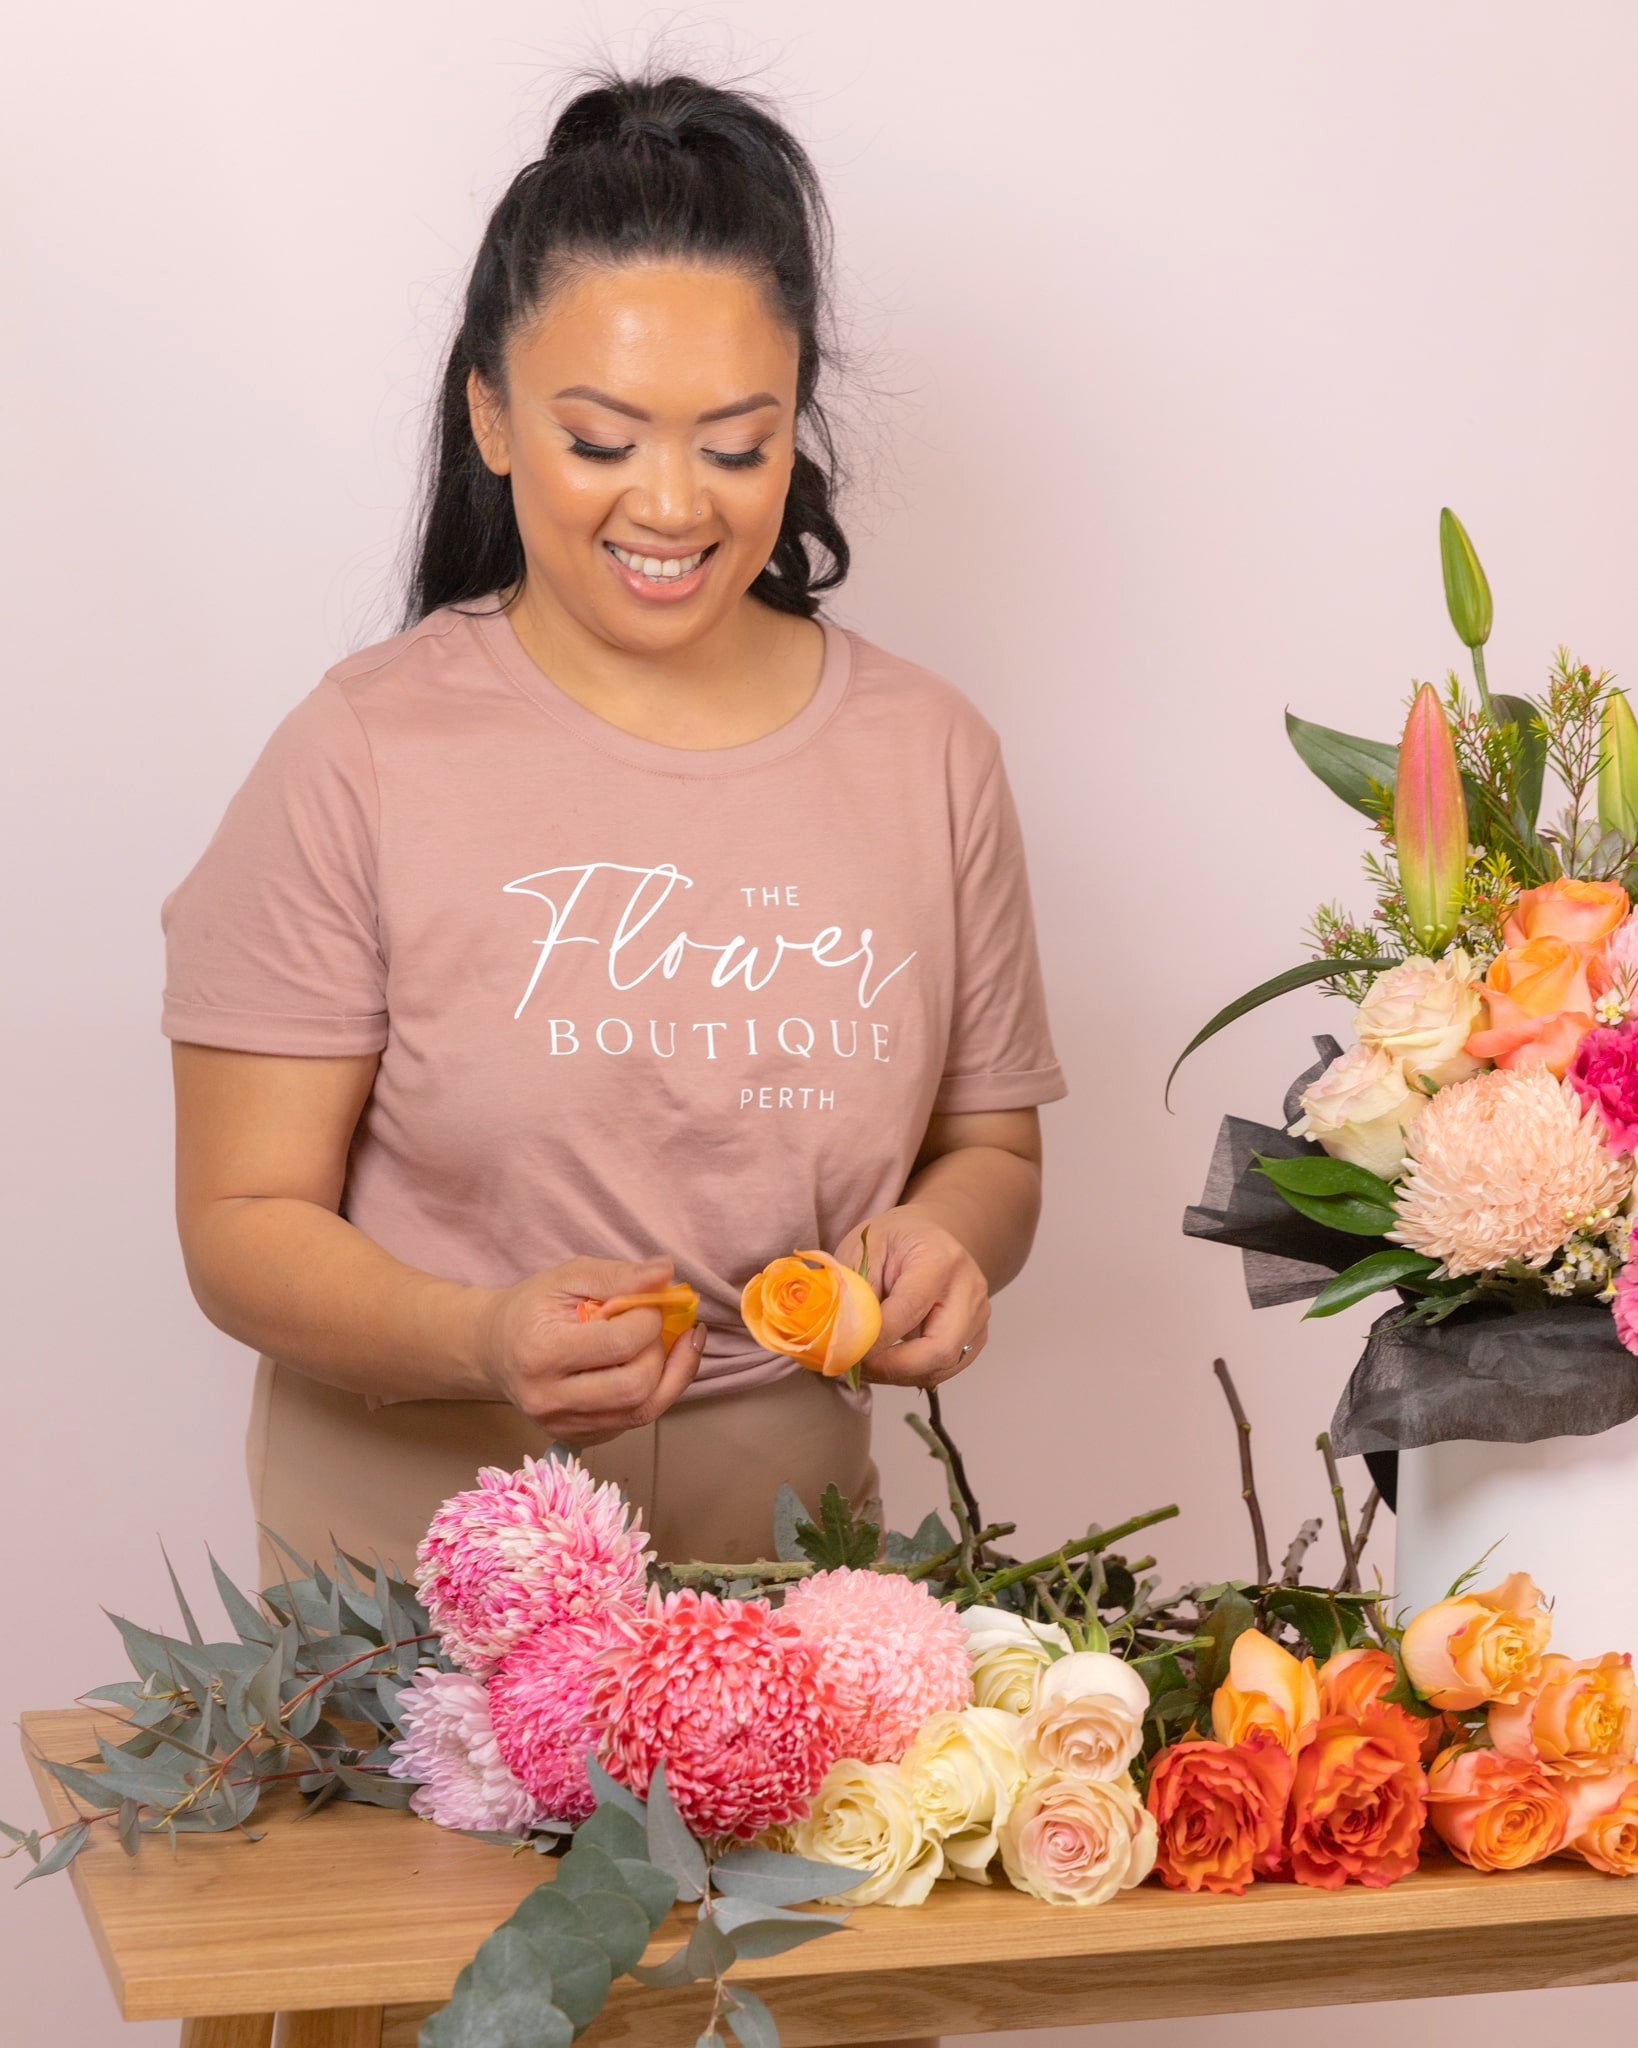 Riana Bertolami from The Flower Boutique in Ashby, Perth - The Flower Boutique, Flower Delivery, Florist